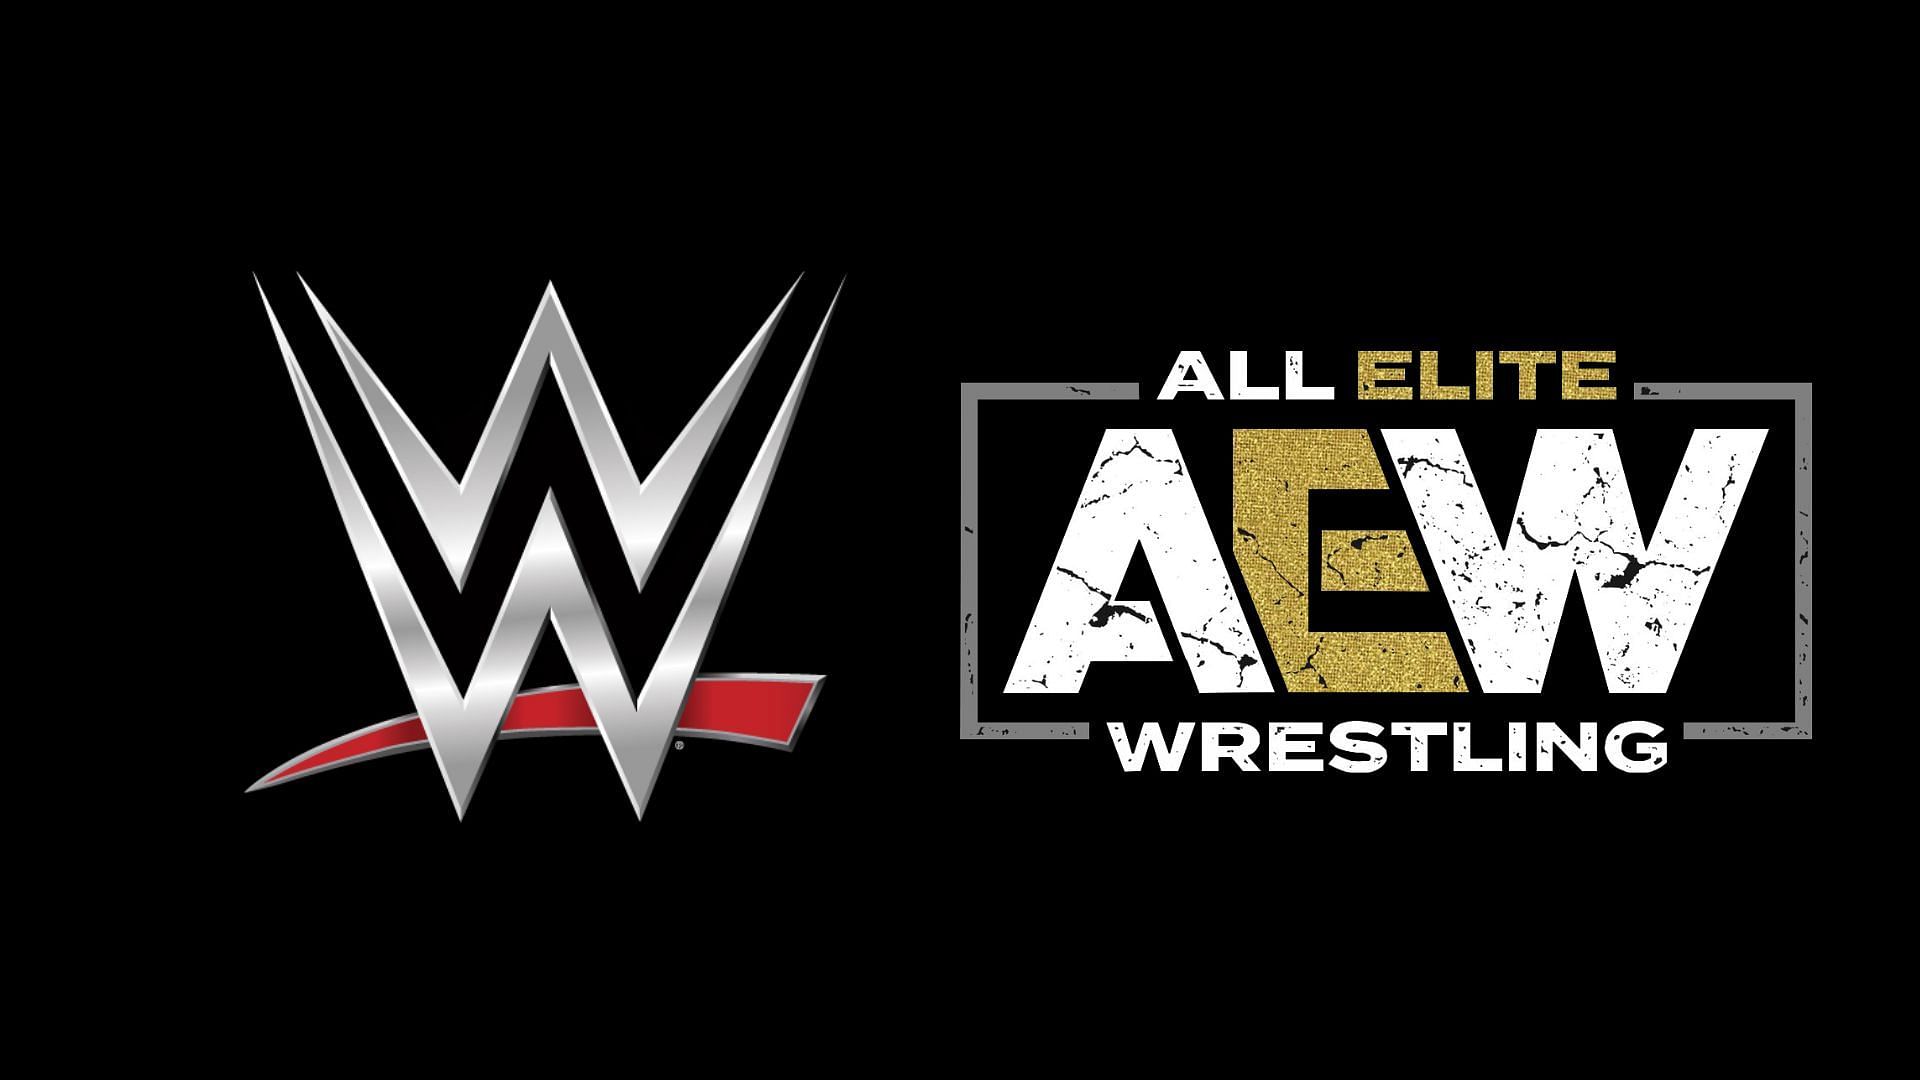 A former WWE superstar will be with AEW for the foreseeable future